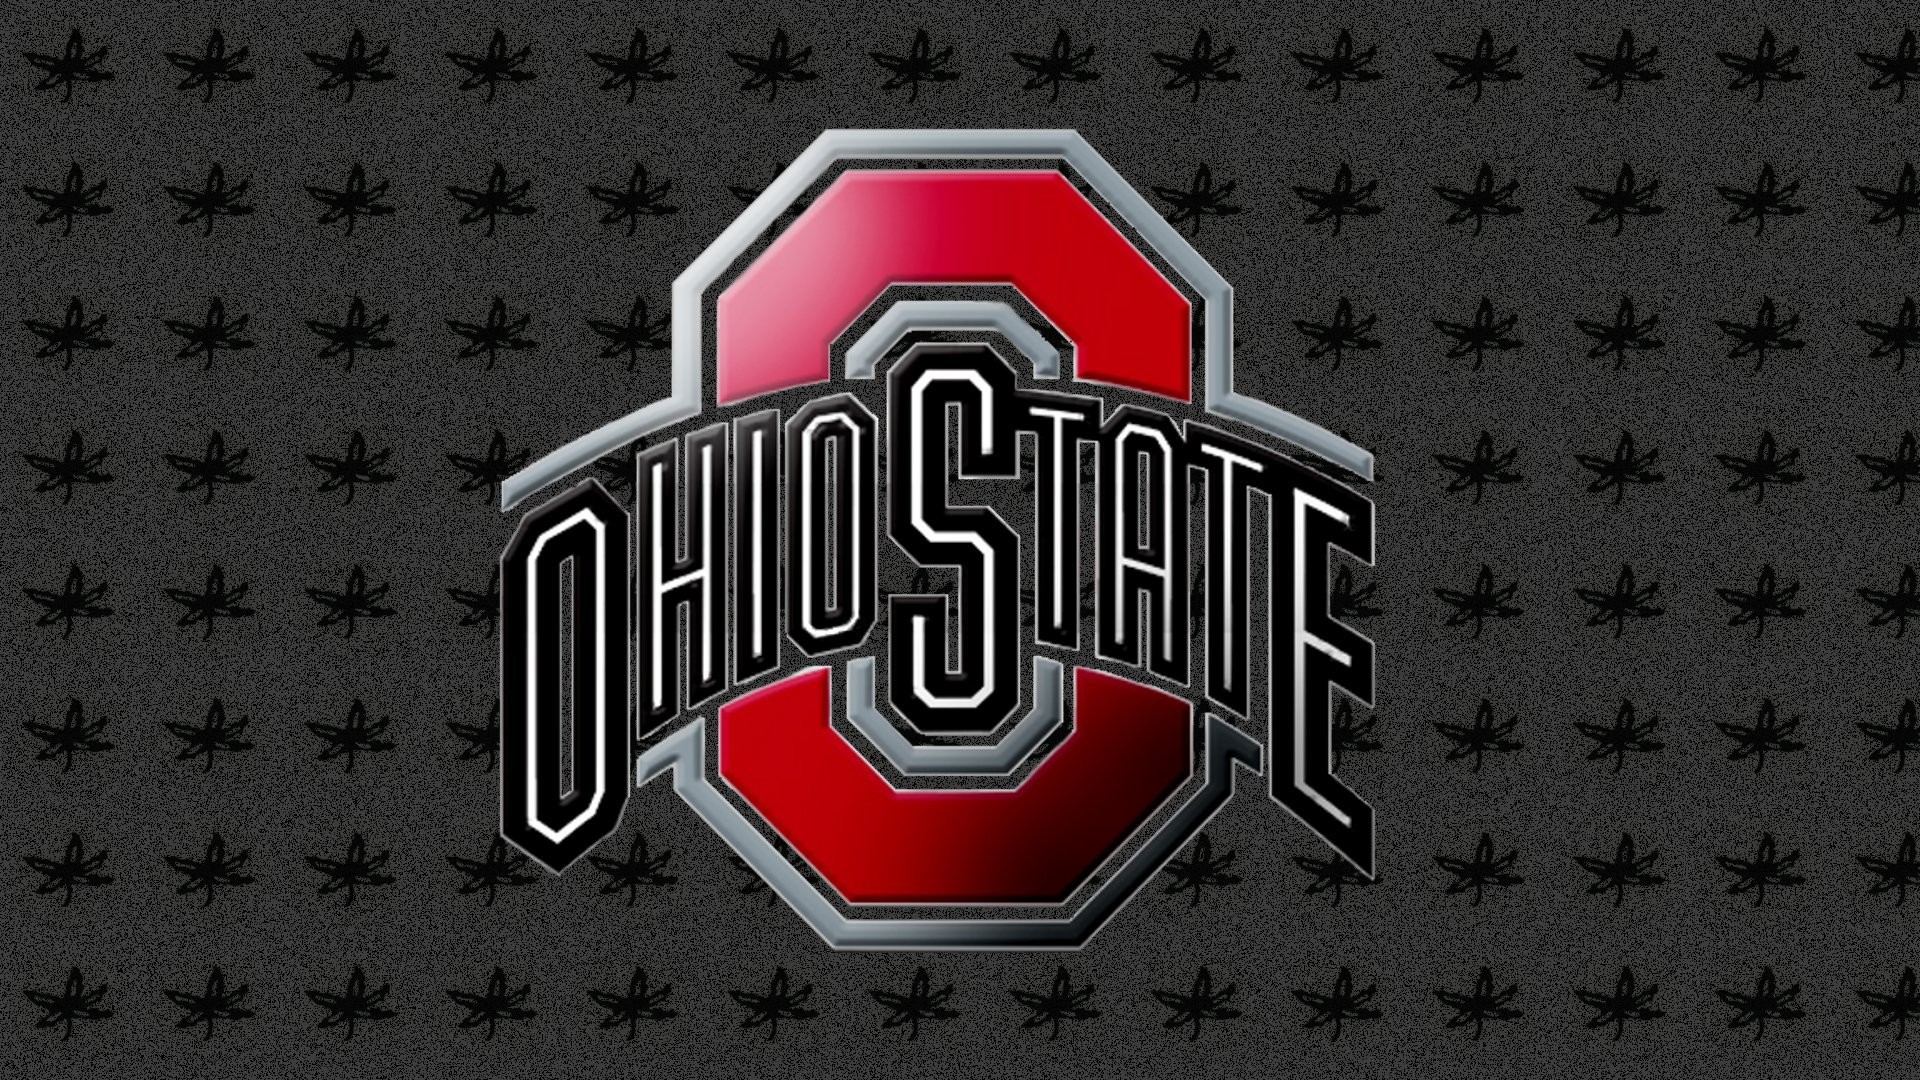 1920x1080 OHIO STATE BUCKEYES college football poster wallpaper |  | 592645  | WallpaperUP